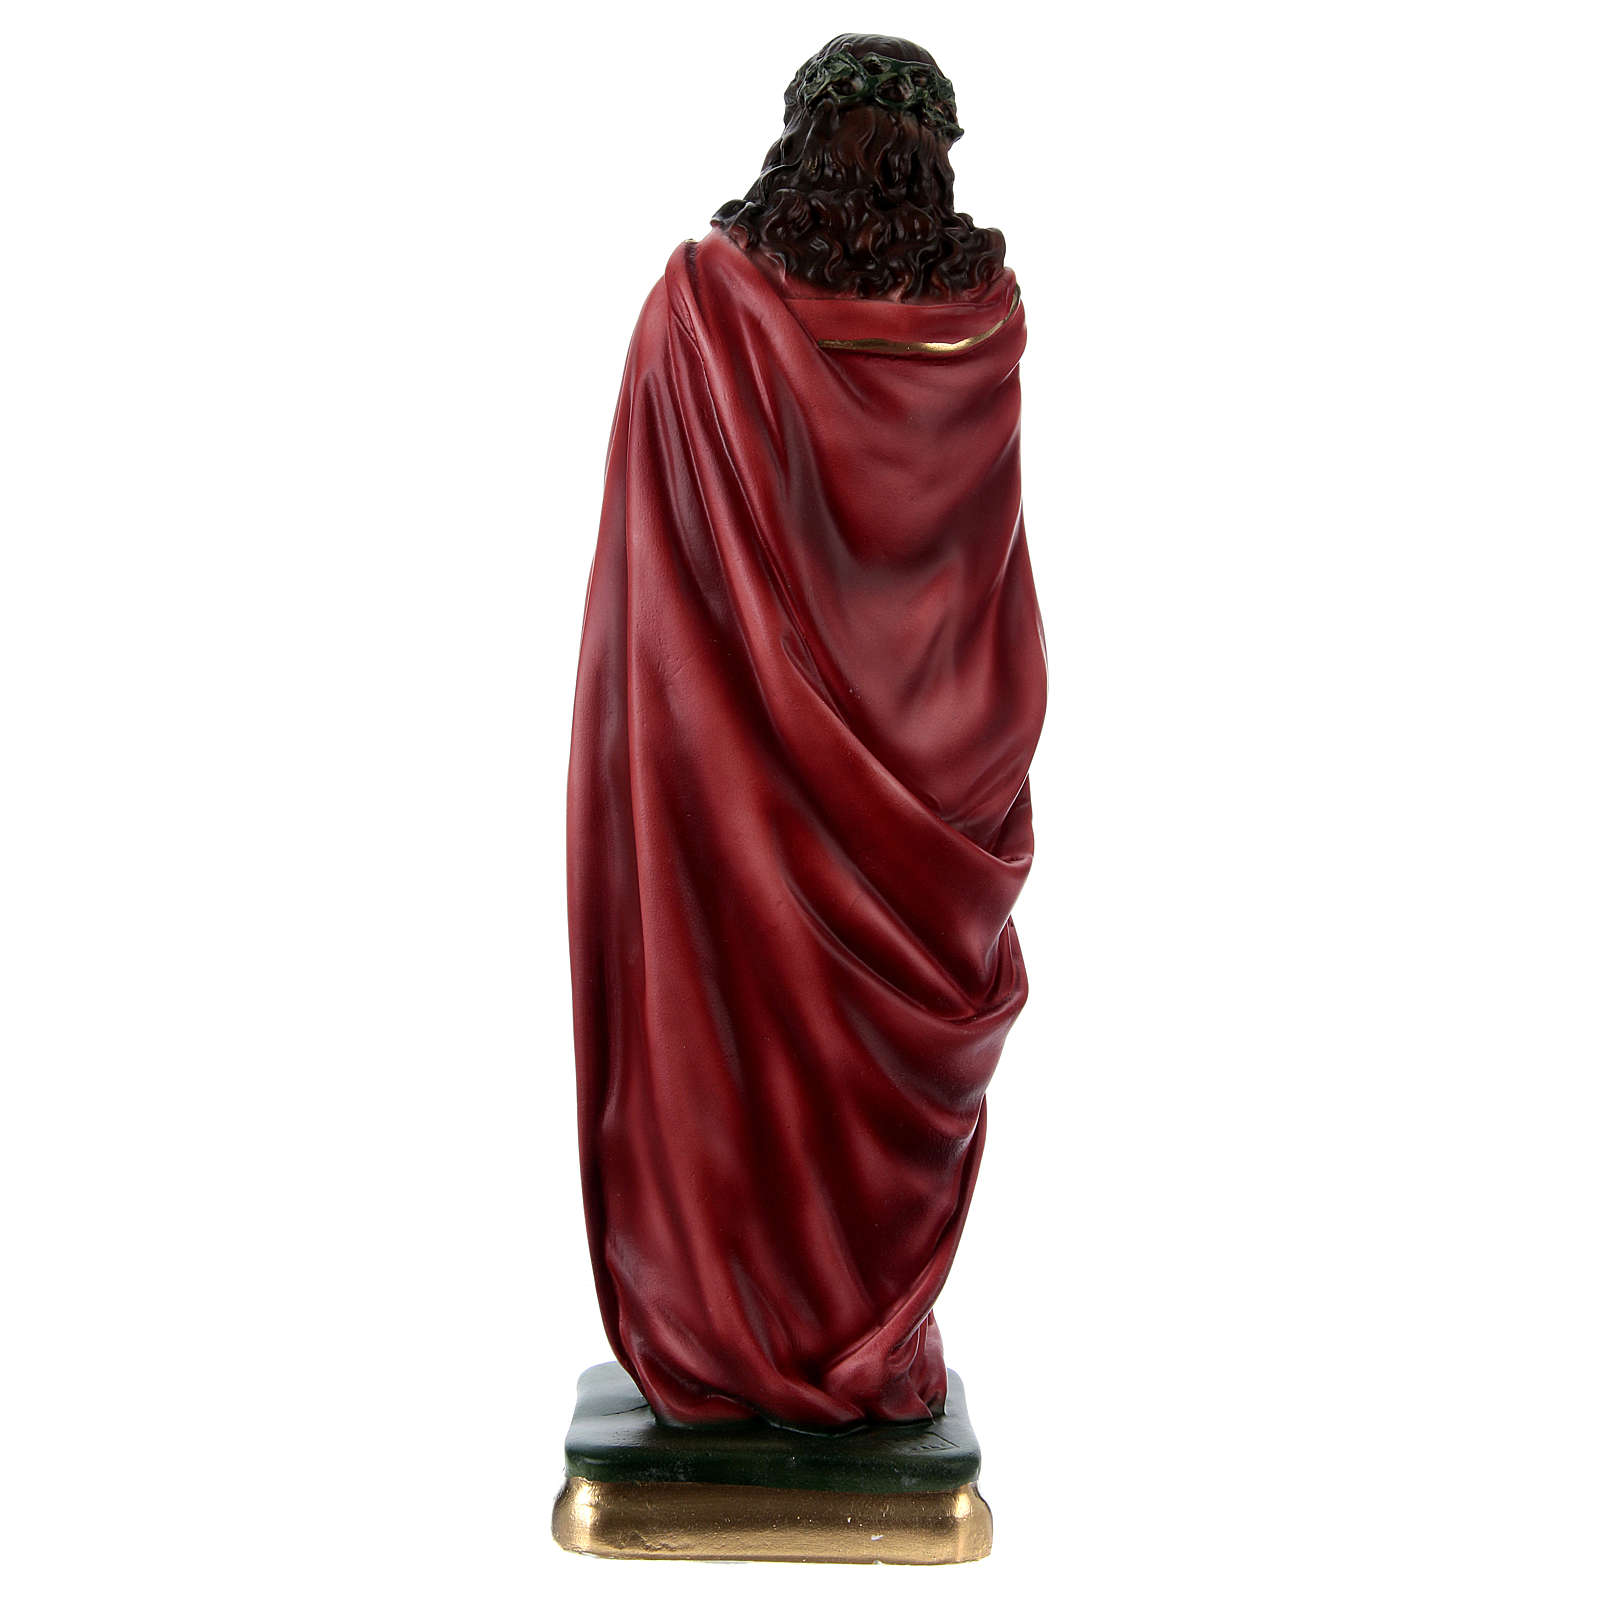 Ecce Homo 40 cm in mother-of-pearl plaster